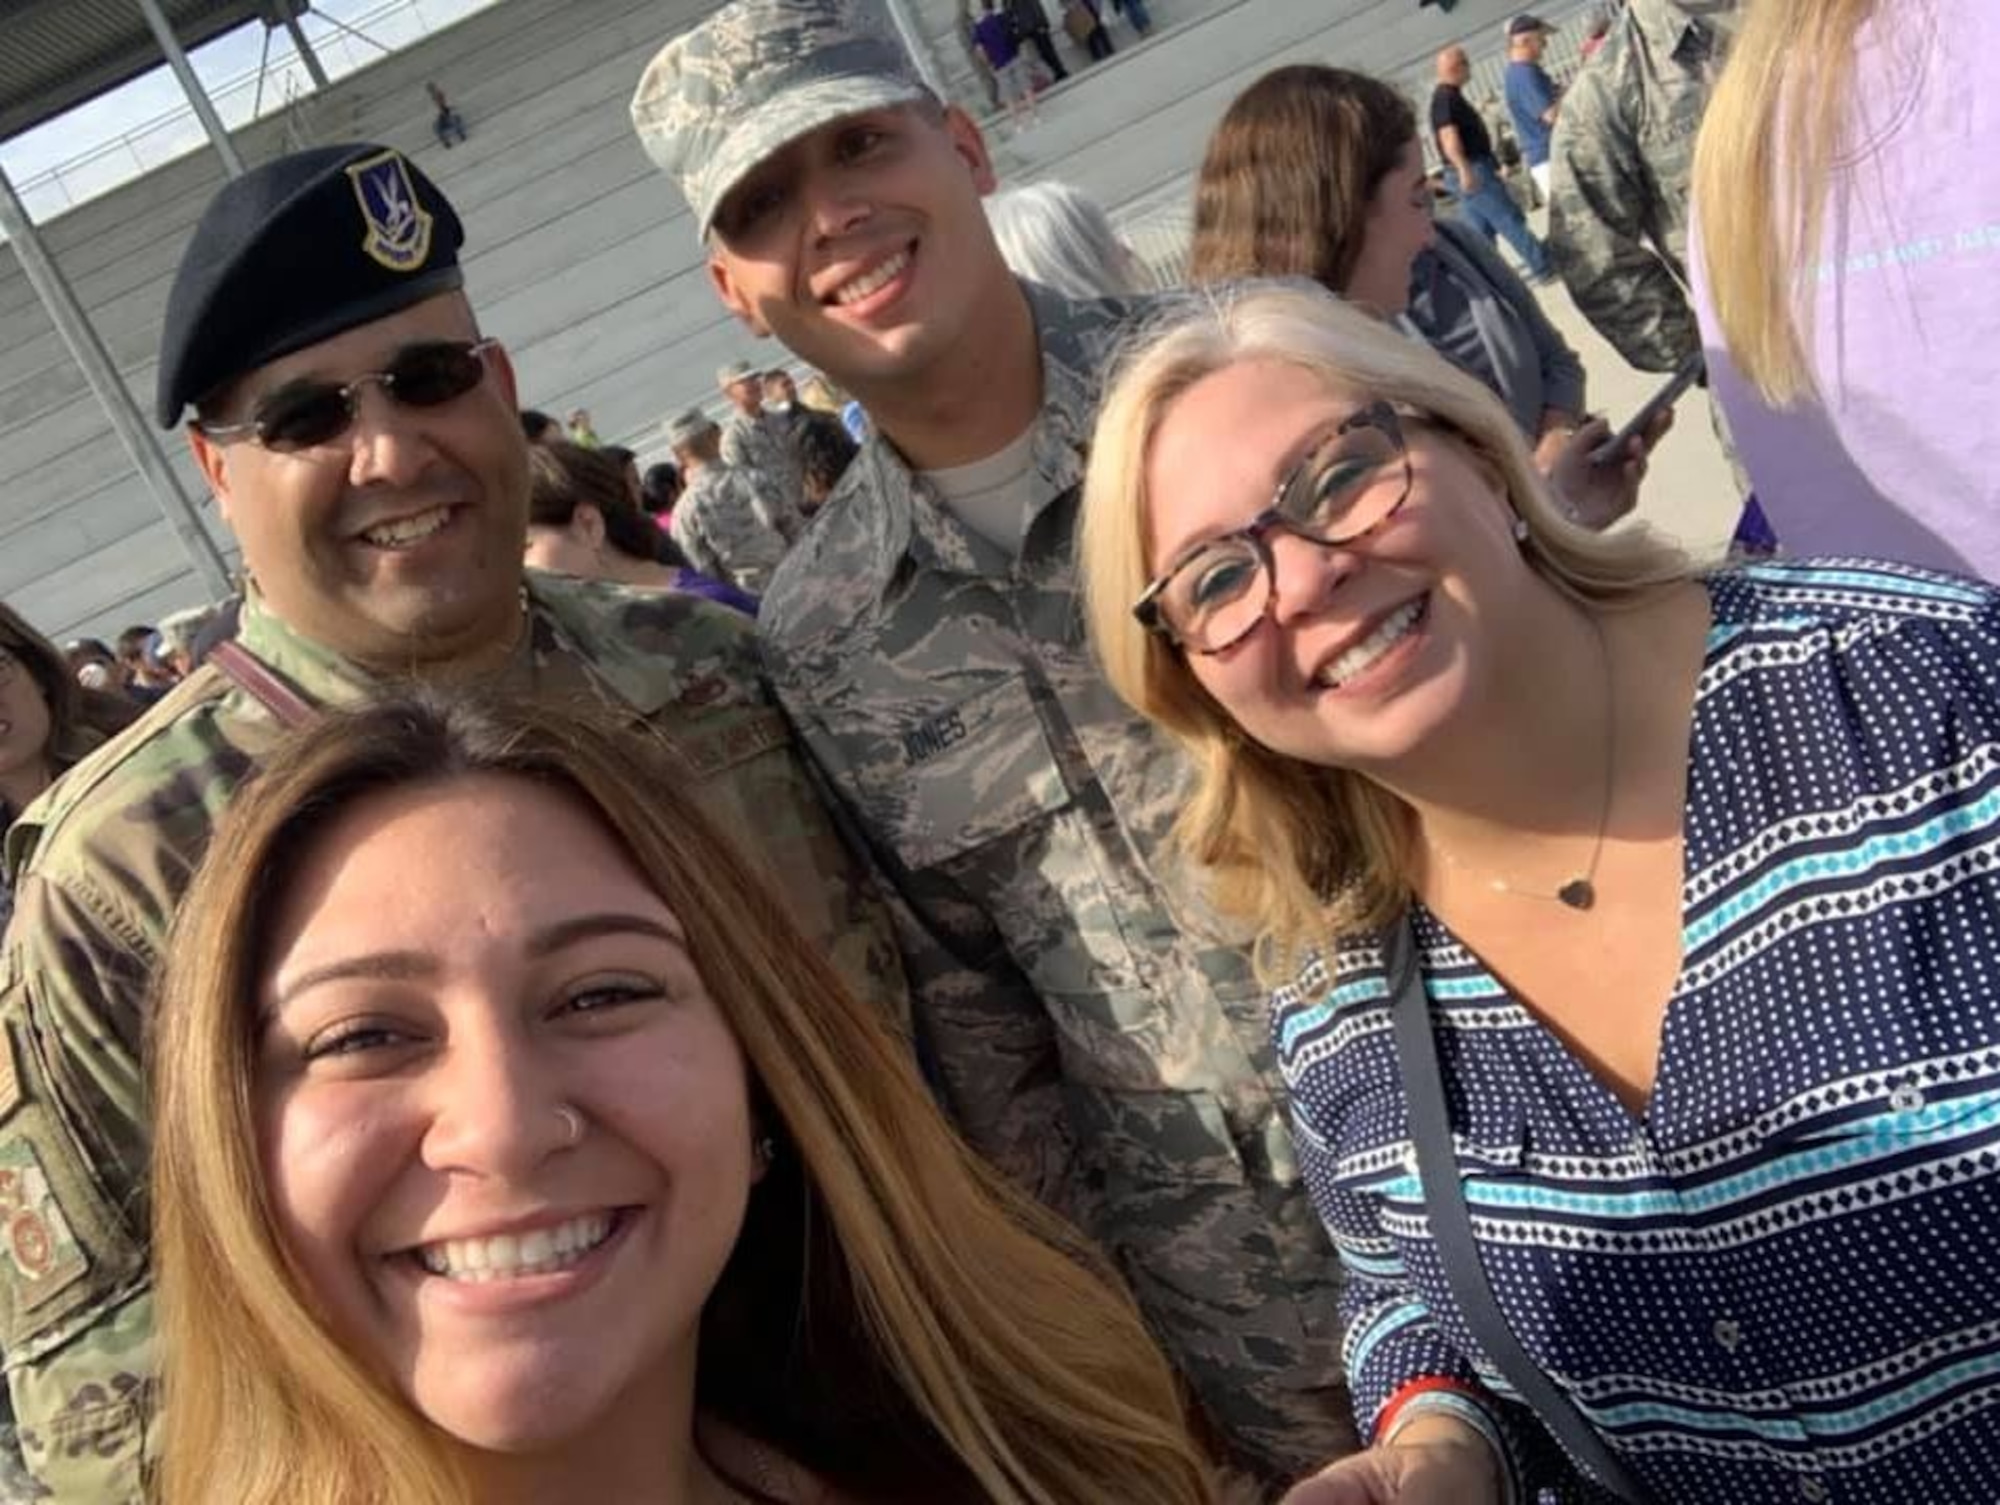 Sergeant Rijos’ culture is all about happiness, resilience and helping others. That is how they lived life on their island, and that is what he wanted to bring to his journey in the military and for Airmen and Guardians. Although it was a rough road for him, he never gave up and persevered through all of the trials that being different brought about.